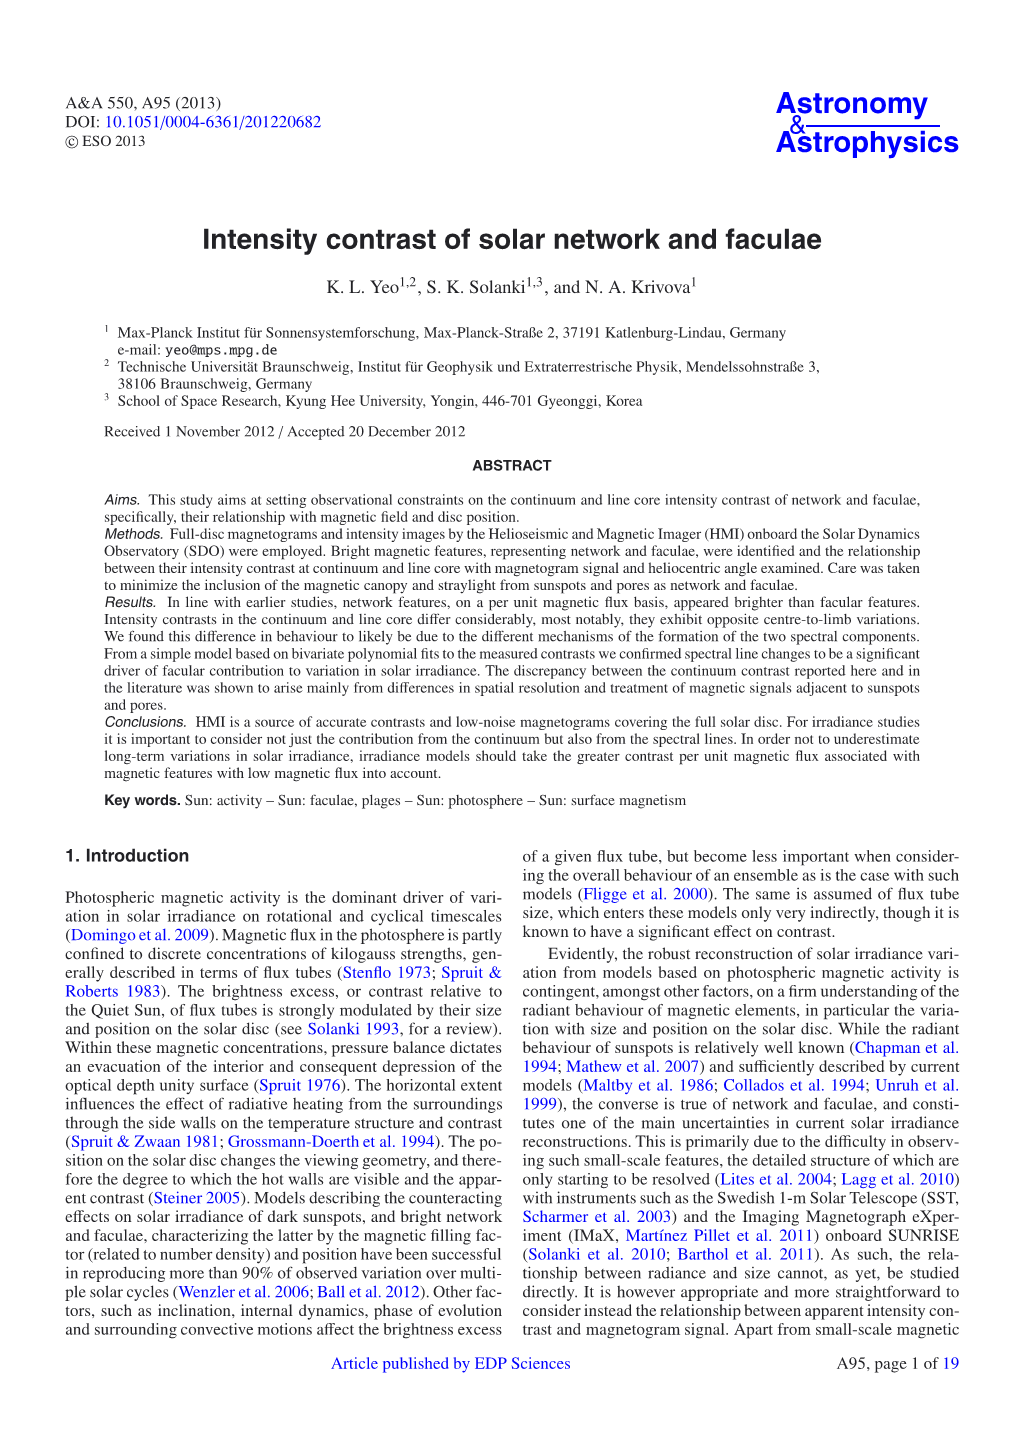 Intensity Contrast of Solar Network and Faculae